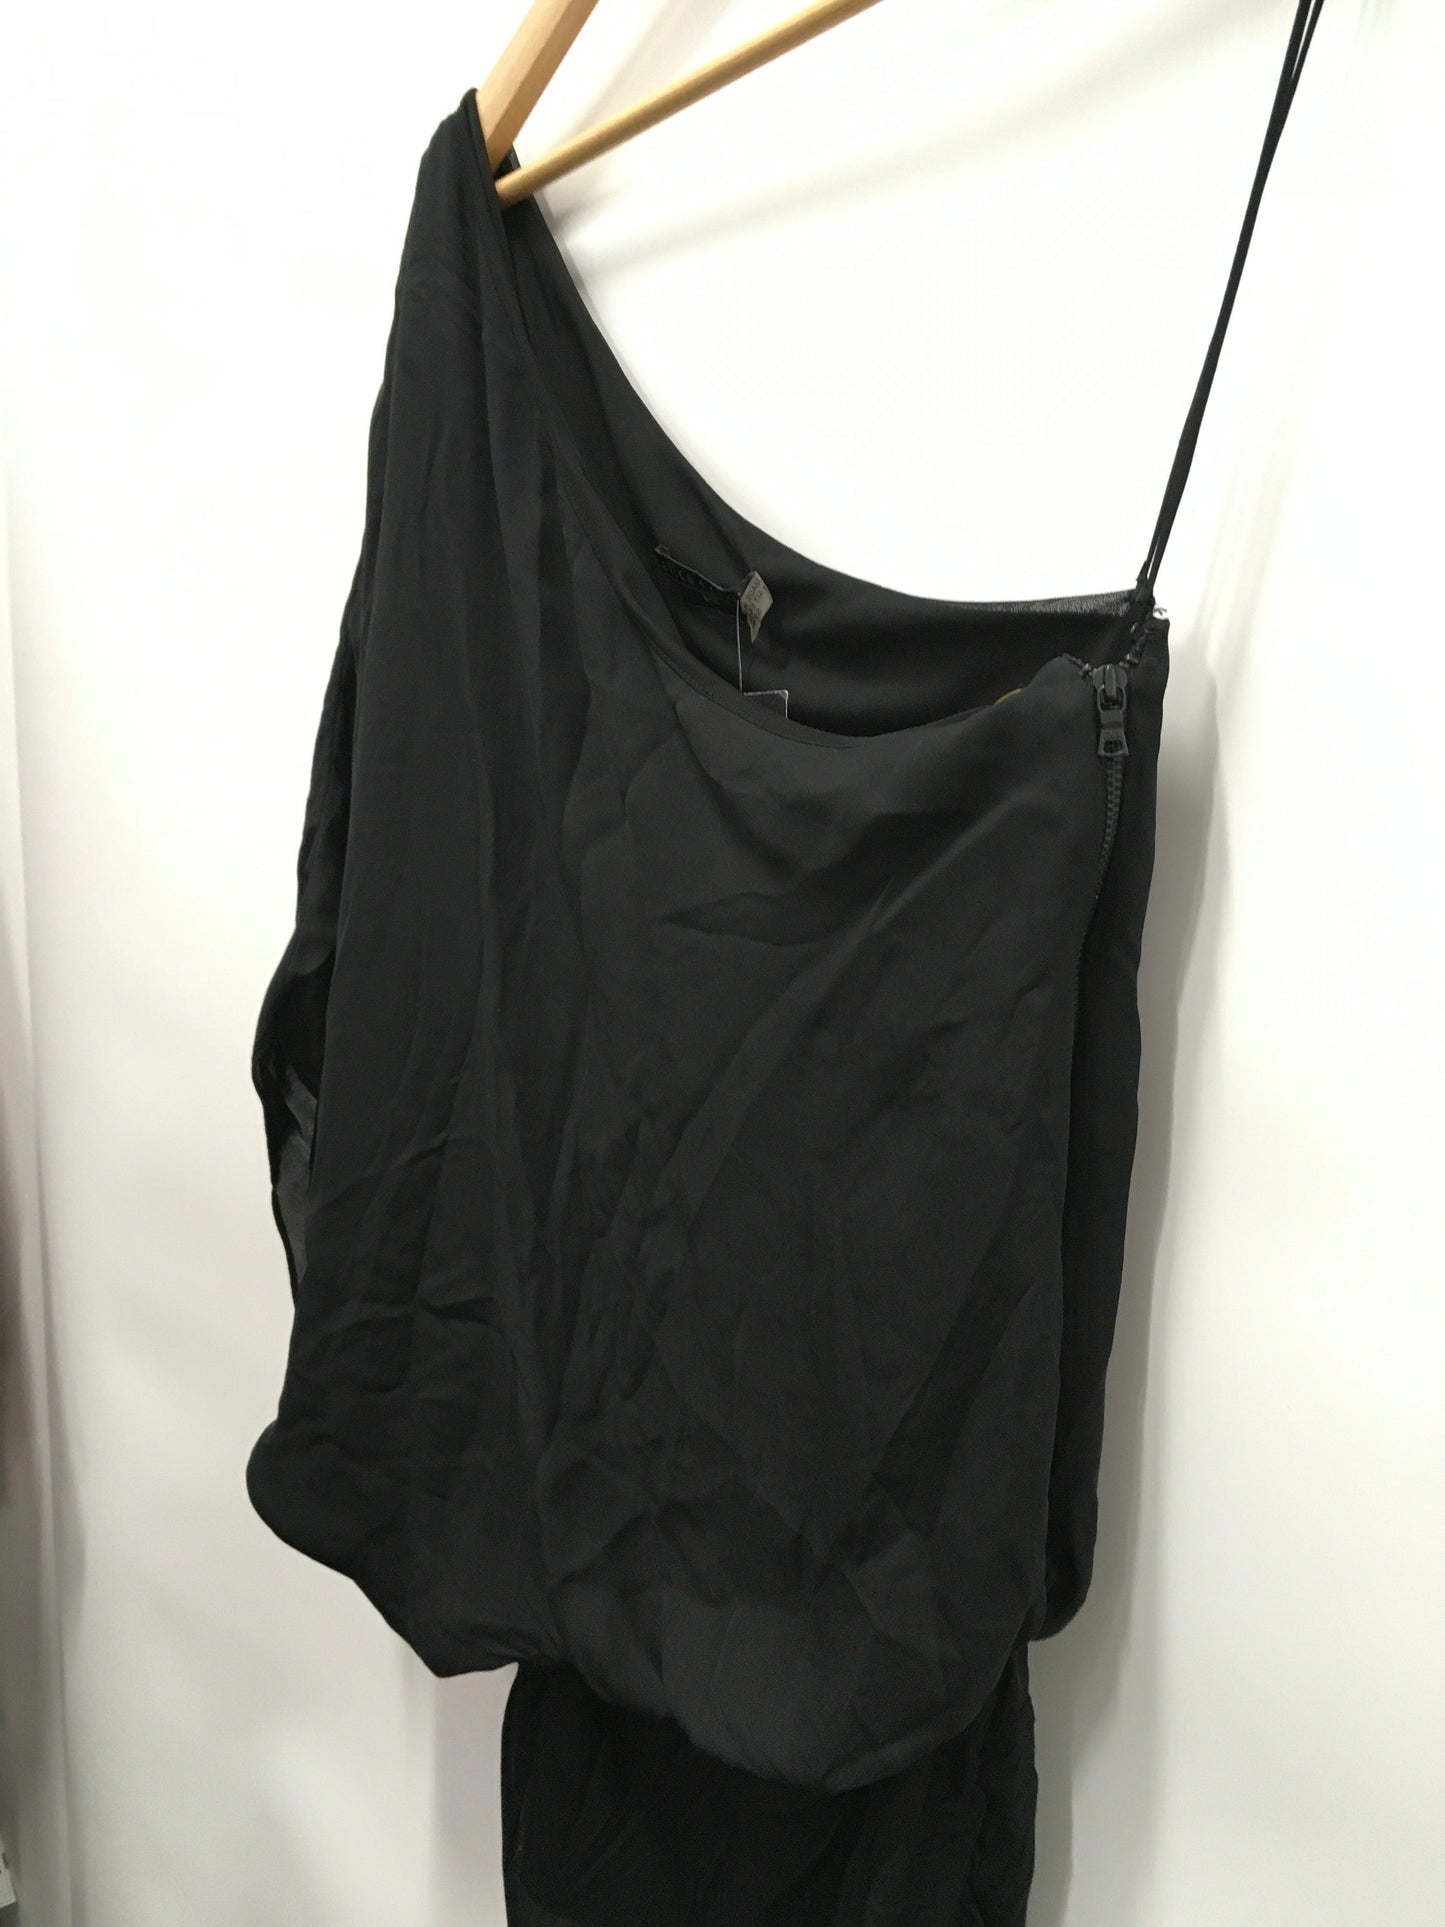 Dress Casual Short By Alice + Olivia  Size: S